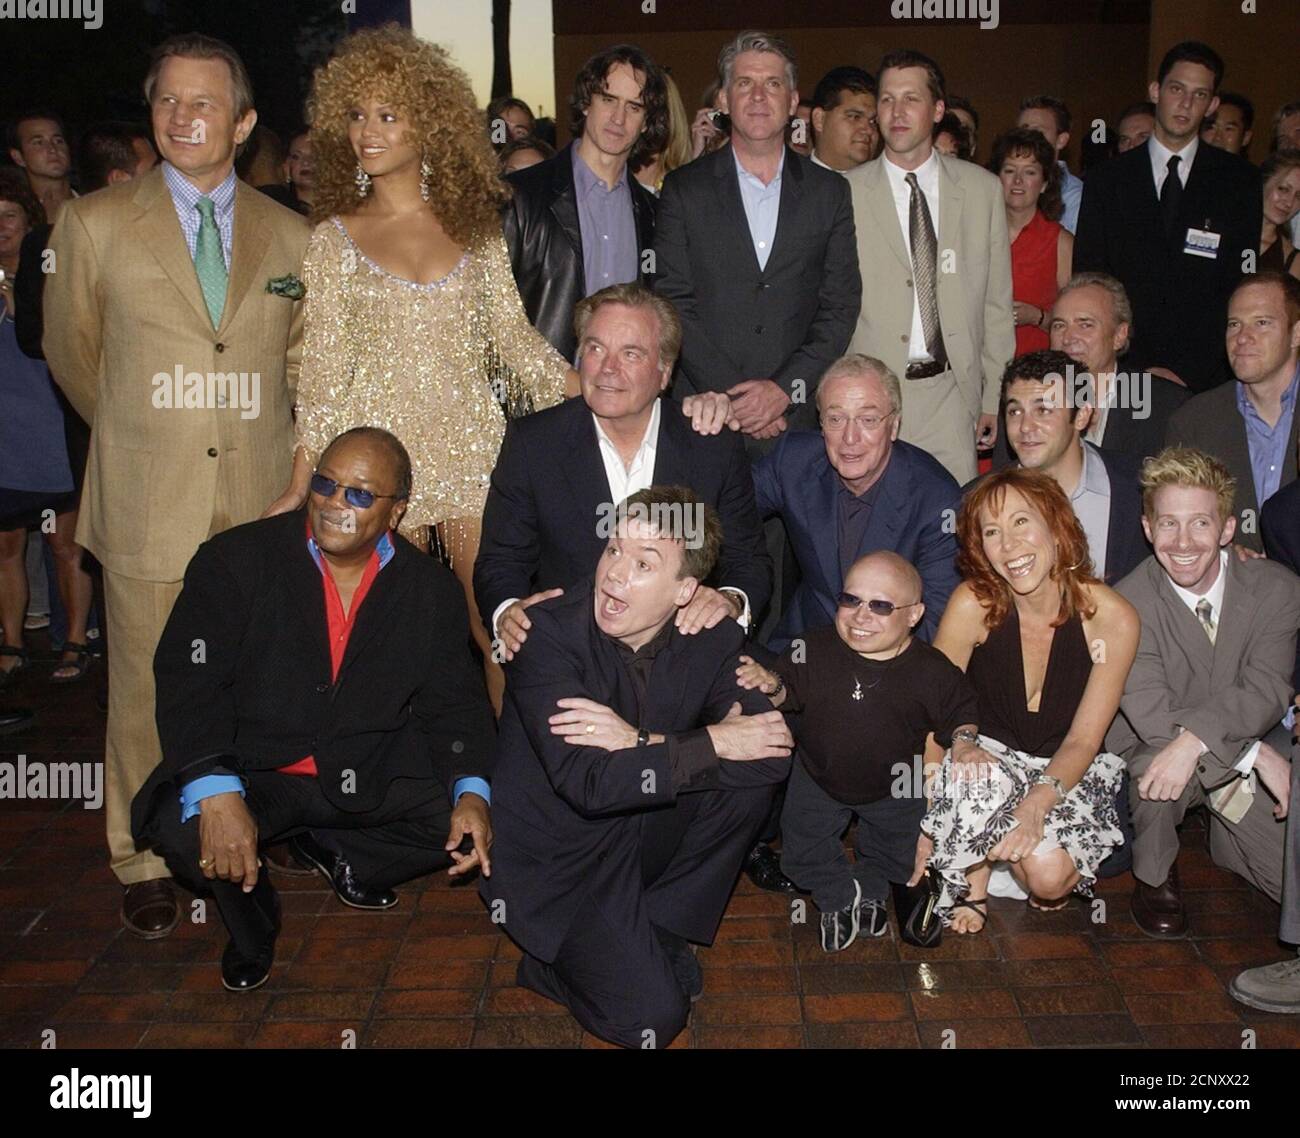 Mike Myers (bottom row, 2nd L), who stars in the motion picture comedy "Austin  Powers in Goldmember", poses with other principal cast members at the  premiere of the film at Universal Amphitheatre